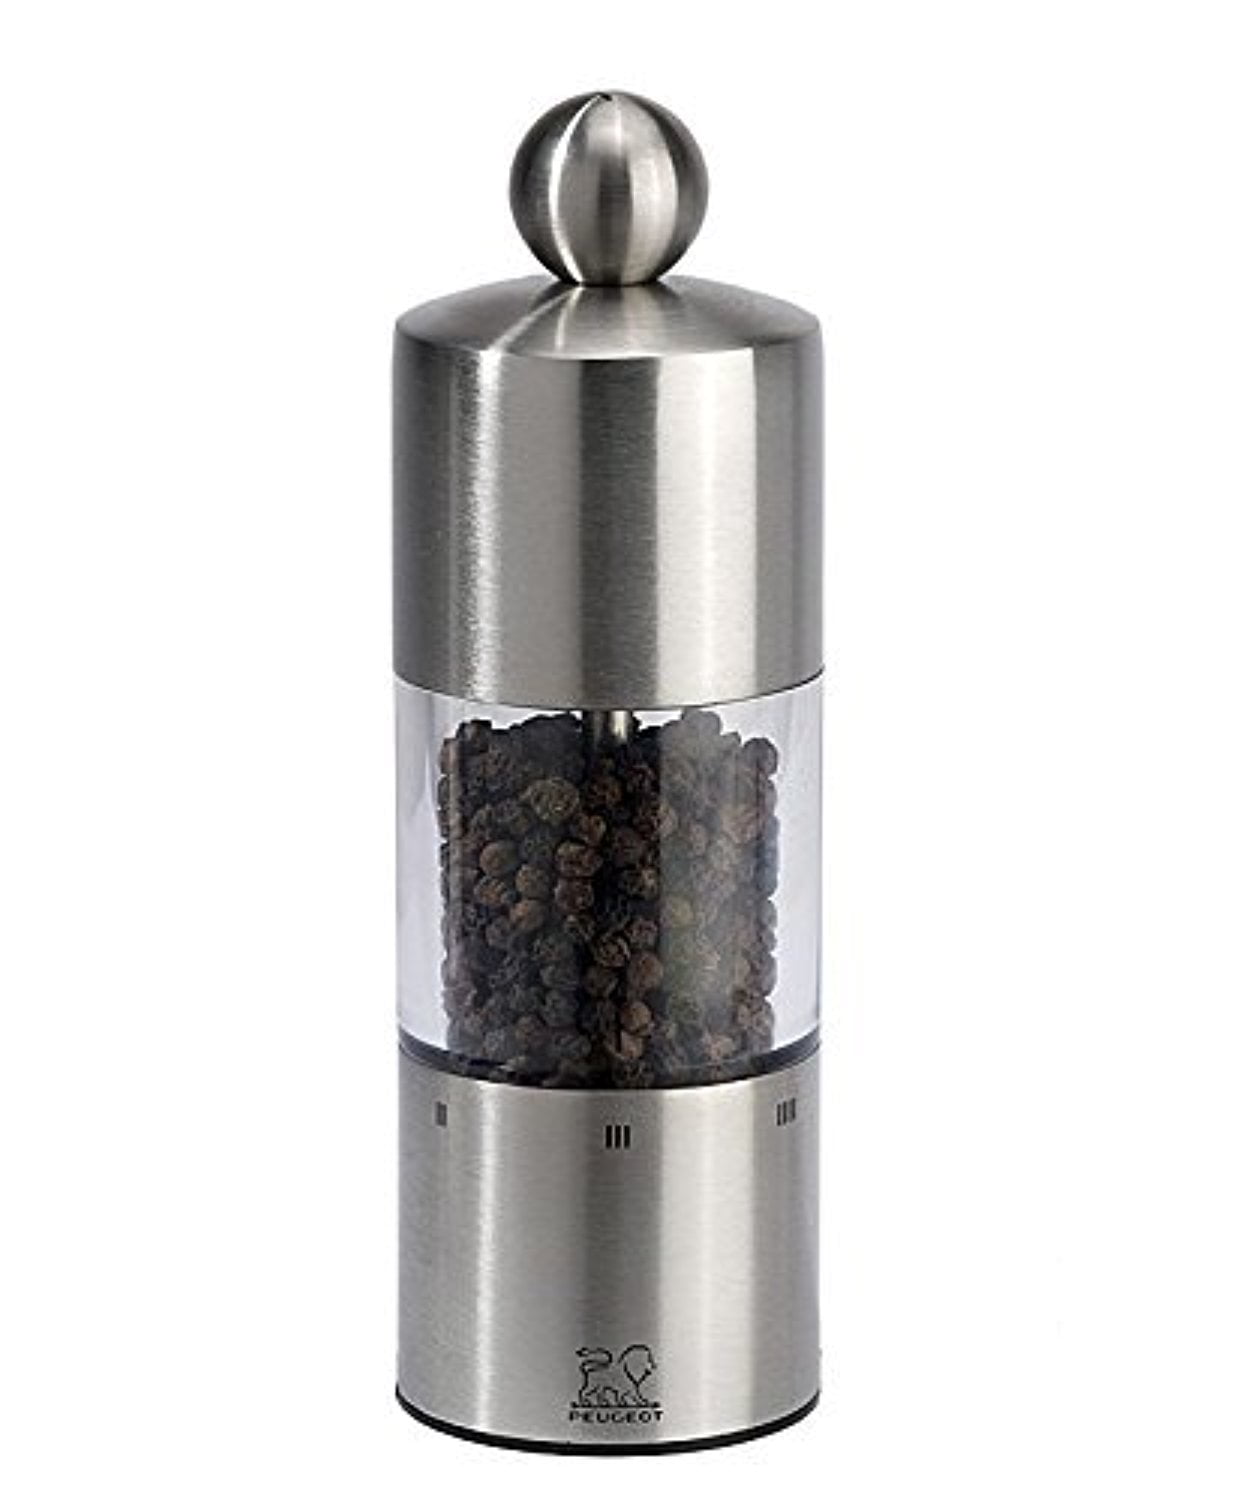 Peugeot 25106 Commercy U'Select 6 Inch Pepper Mill, Stainless Steel Peugeot Pepper Mill Stainless Steel